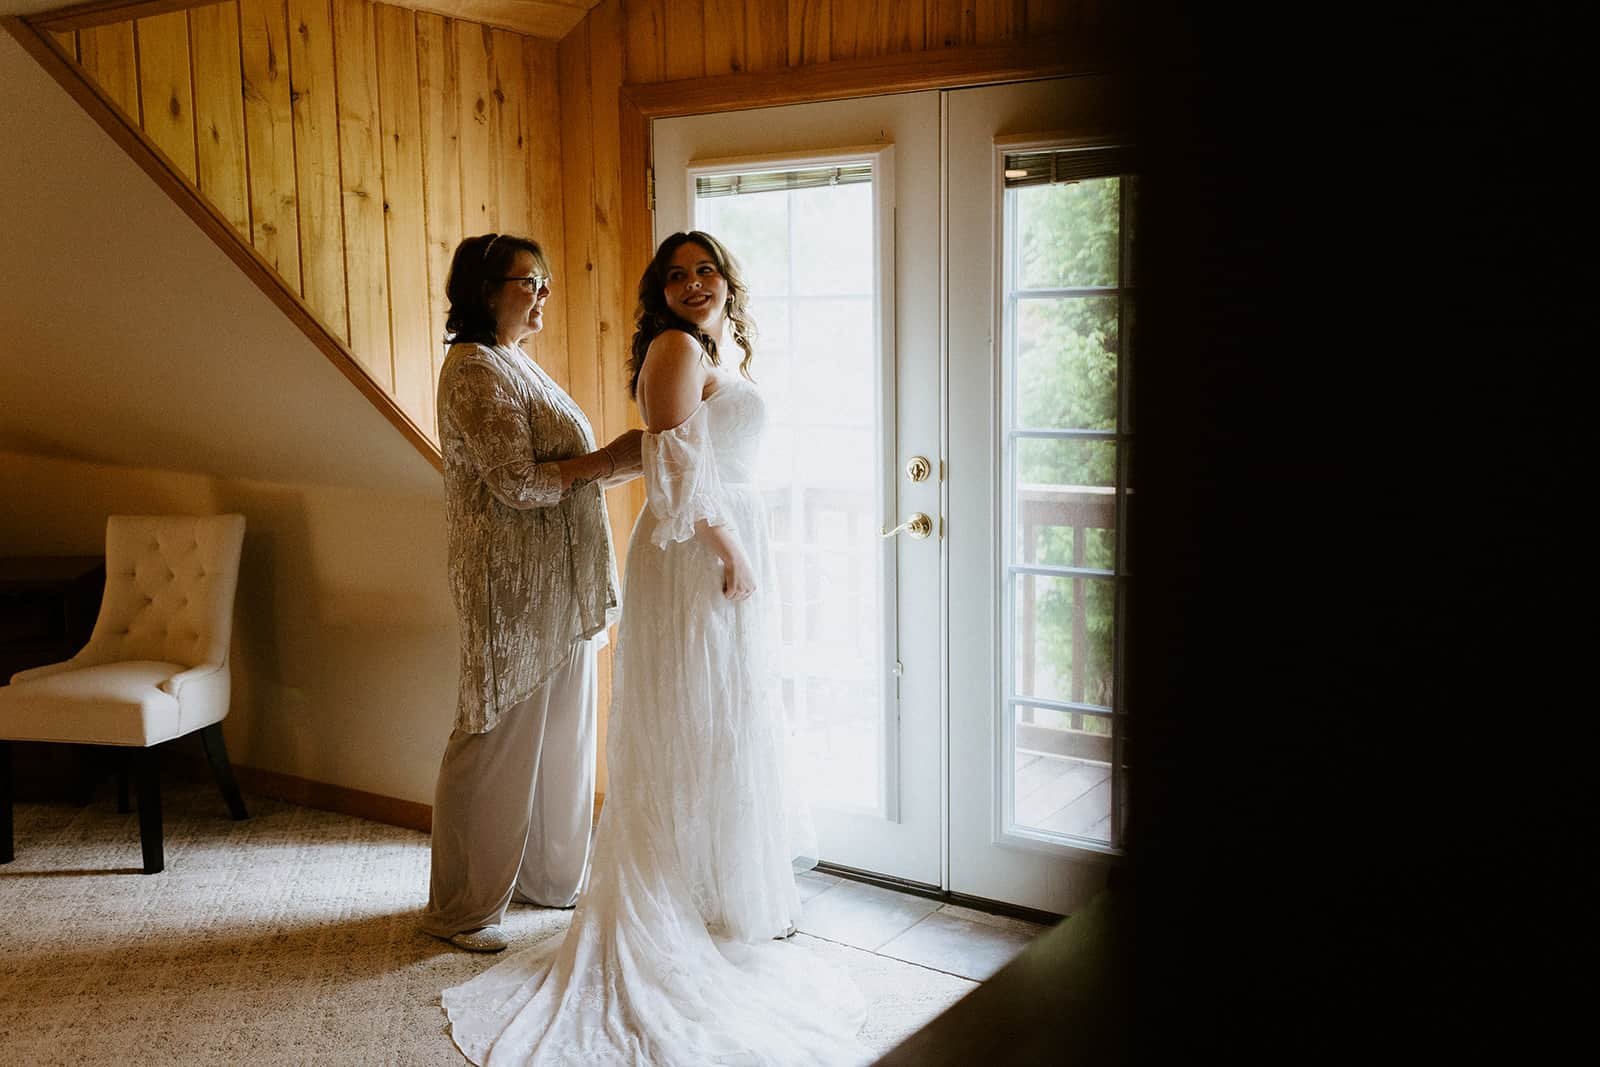 A mother helps her daughter put on her wedding dress in front of a window with natural light